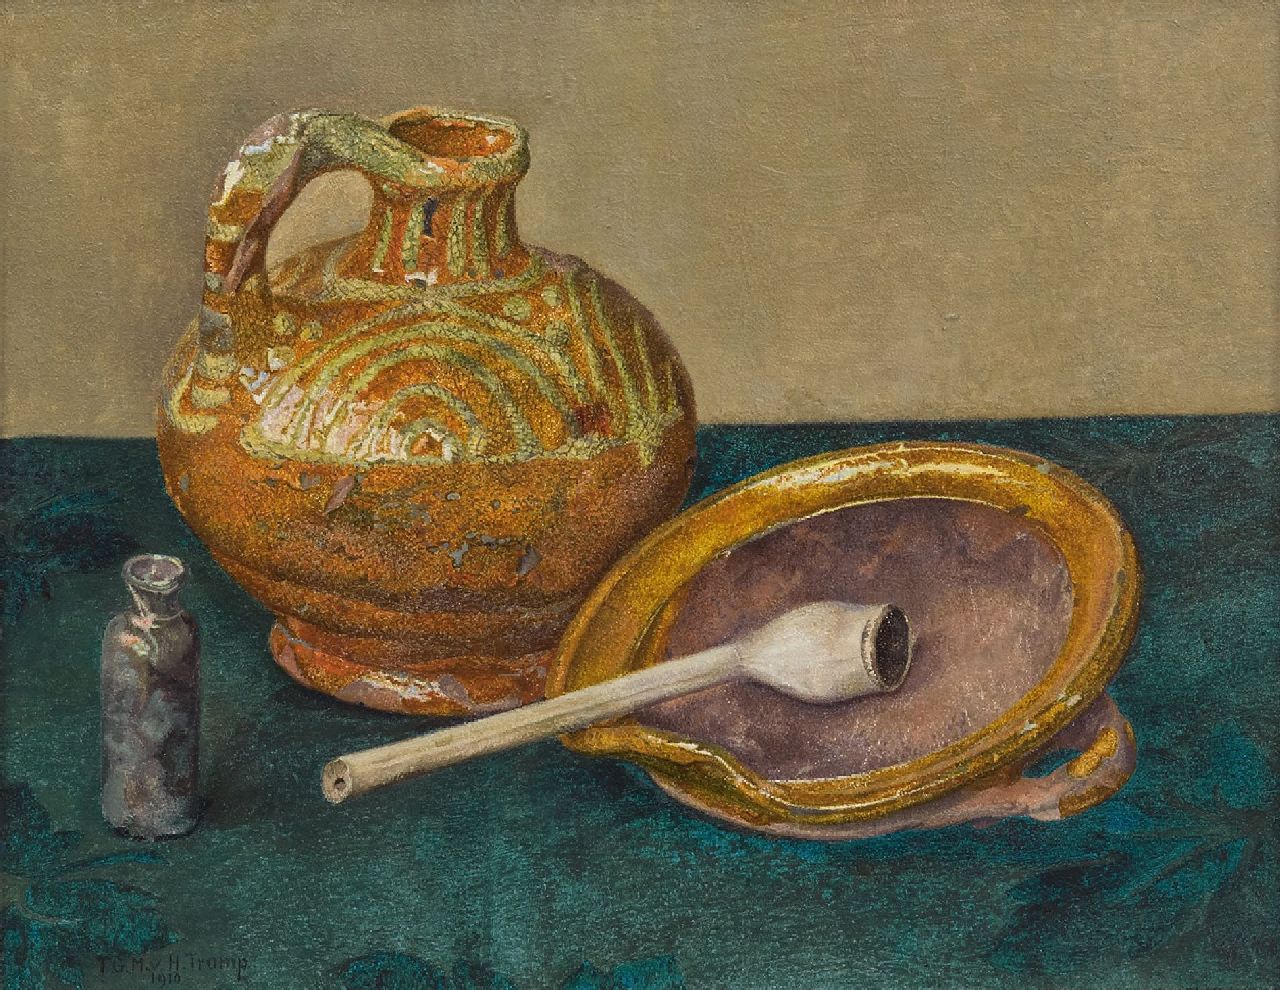 Hettinga Tromp T.G.M. van | Tjitske Geertruida Maria van Hettinga Tromp | Paintings offered for sale | Still life with pottery and a pipe, oil on panel 21.5 x 27.1 cm, signed l.l. and dated 1910